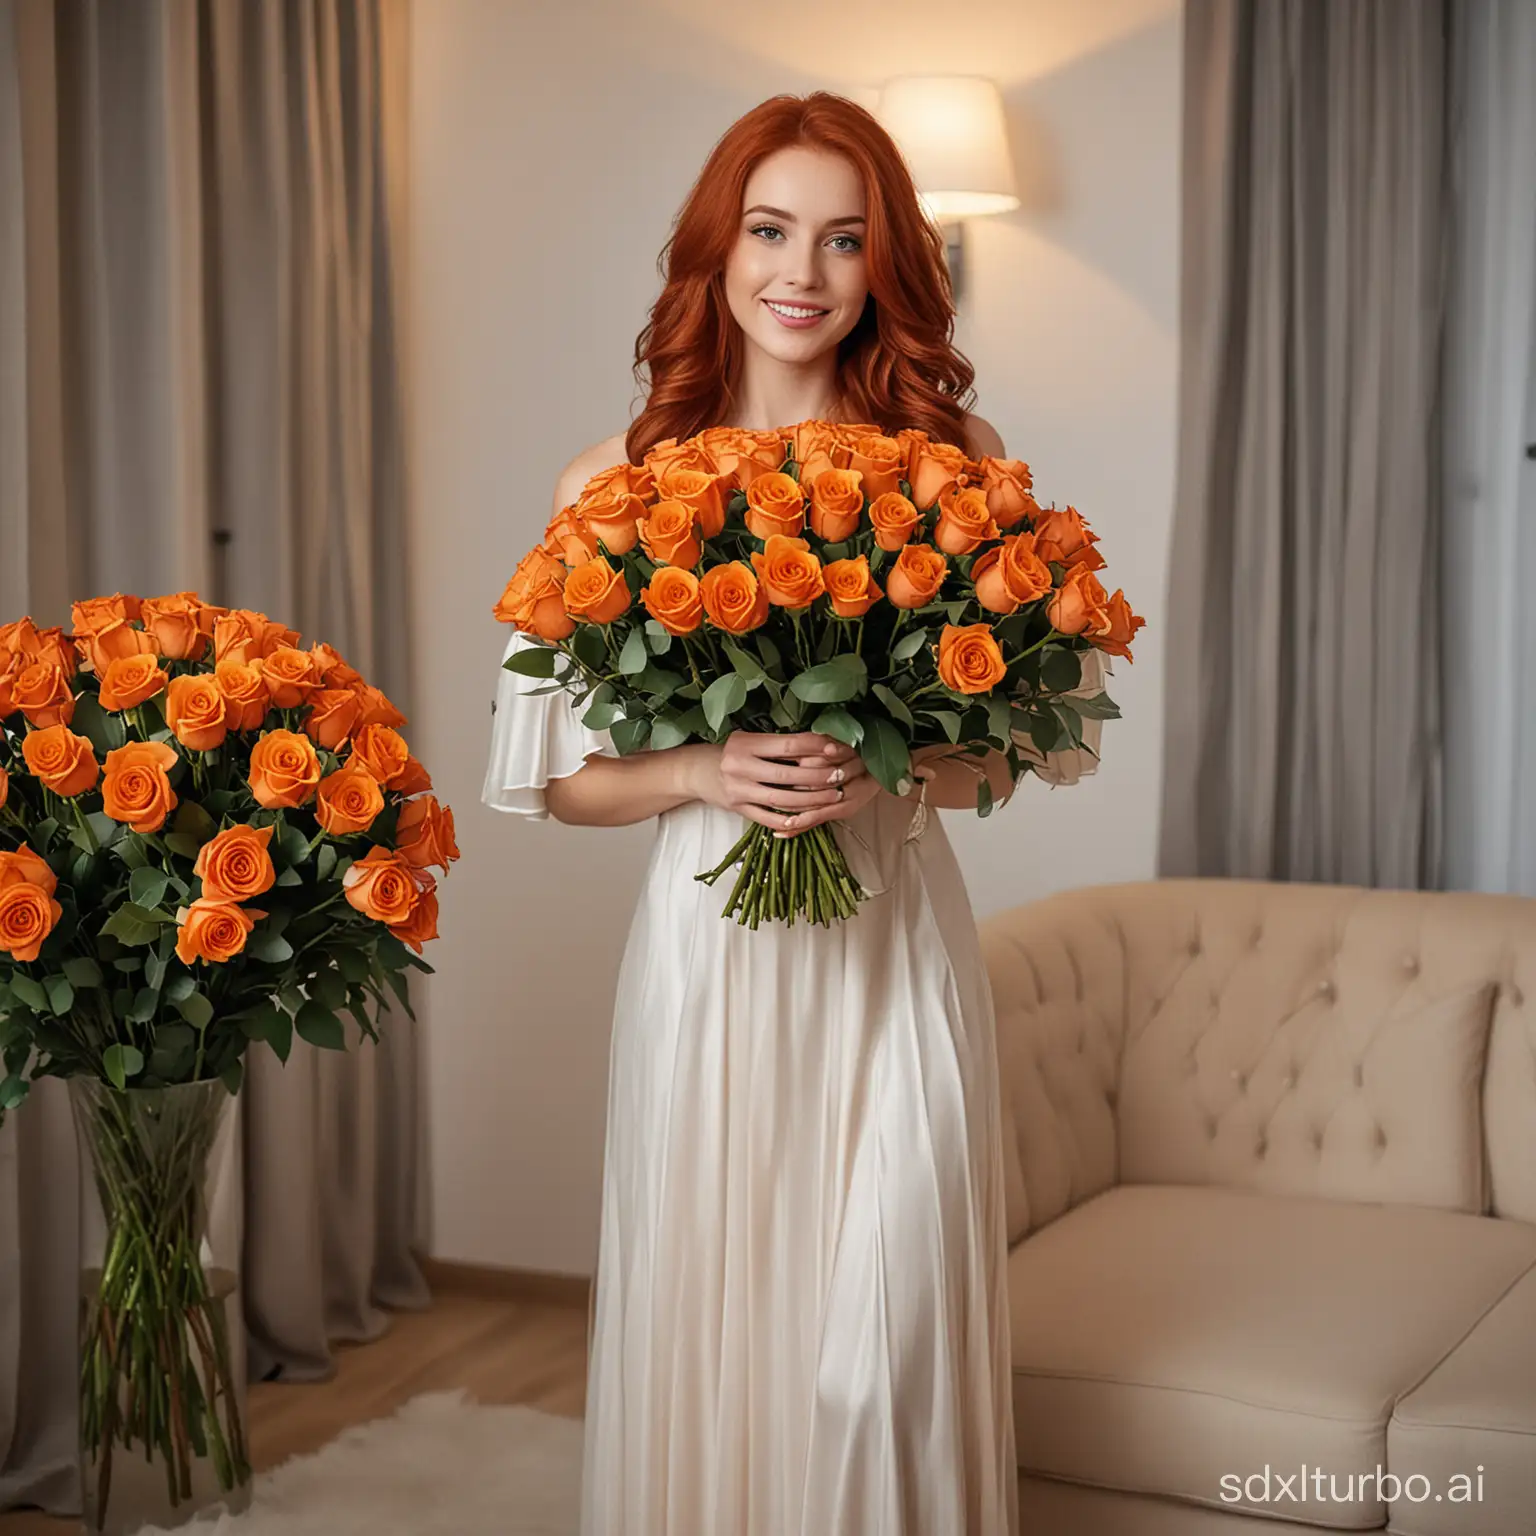 Beautiful girl in an evening dress, with long red hair, holding a large bouquet of 101 orange roses, standing in the living room with